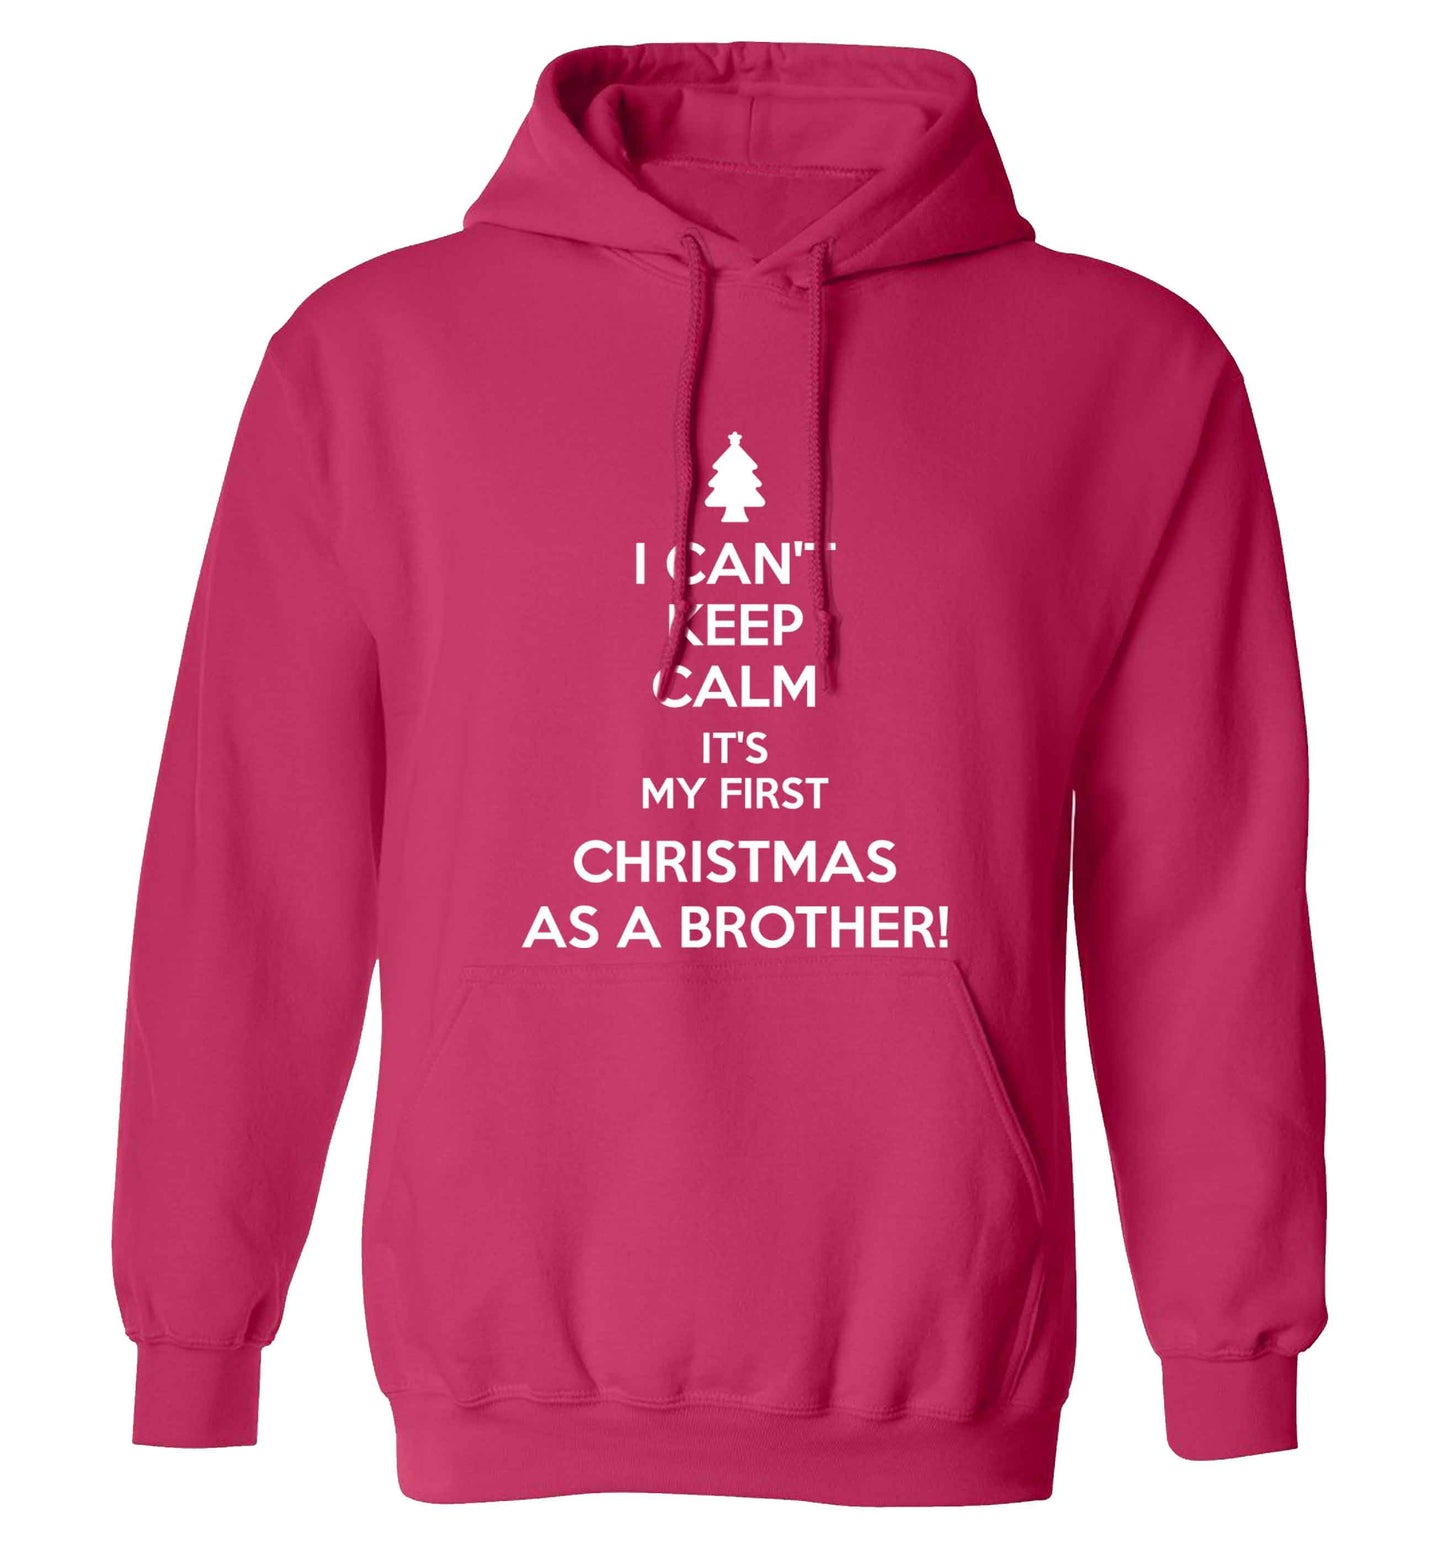 I can't keep calm it's my first Christmas as a brother! adults unisex pink hoodie 2XL